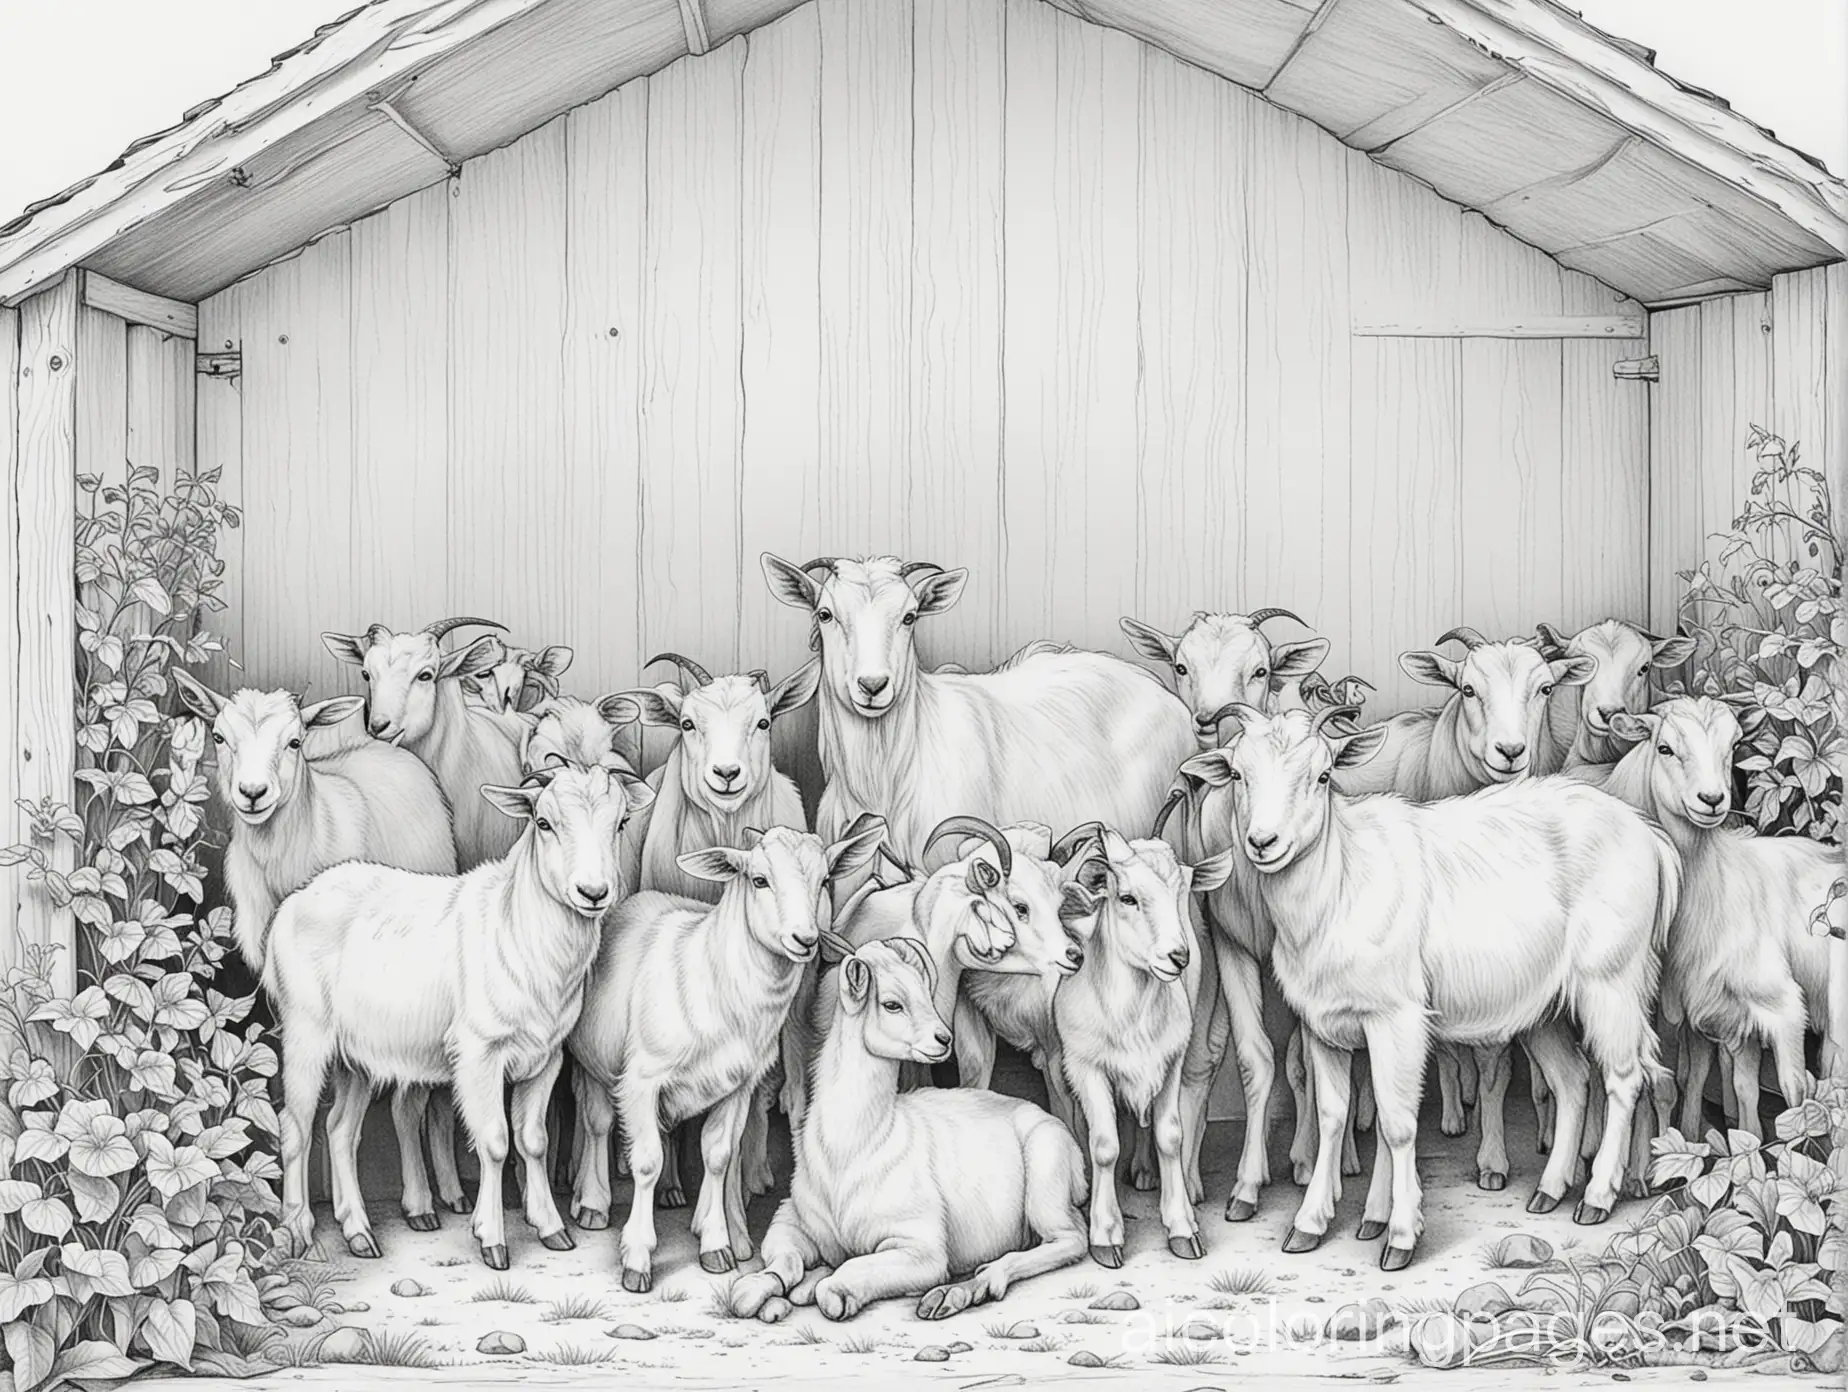 Goats-in-Shed-Coloring-Page-Simple-Line-Art-for-Easy-Coloring